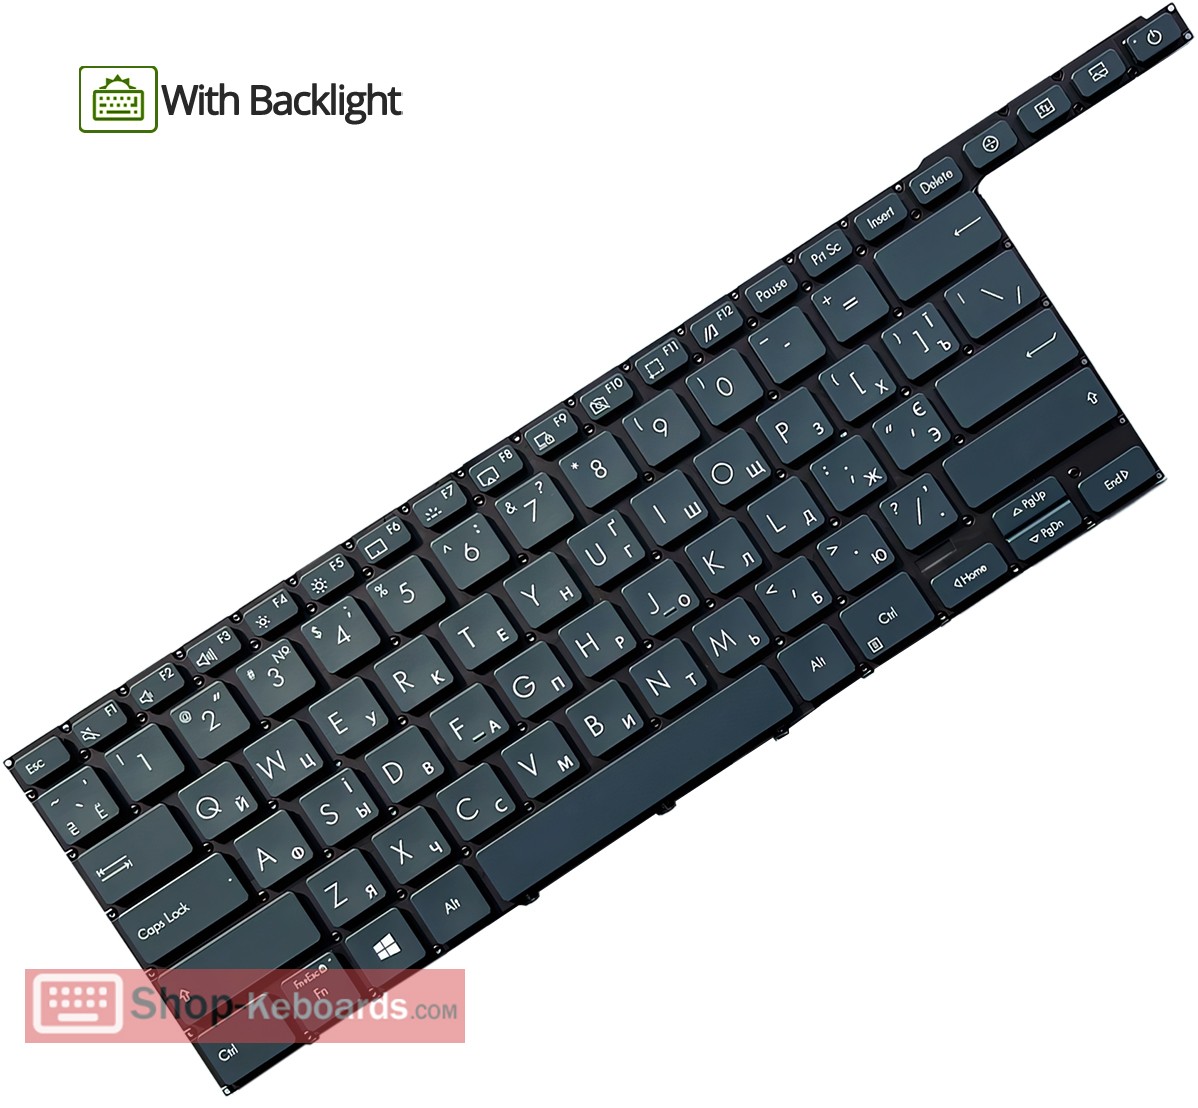 Asus 0KNB0-6823SF00  Keyboard replacement